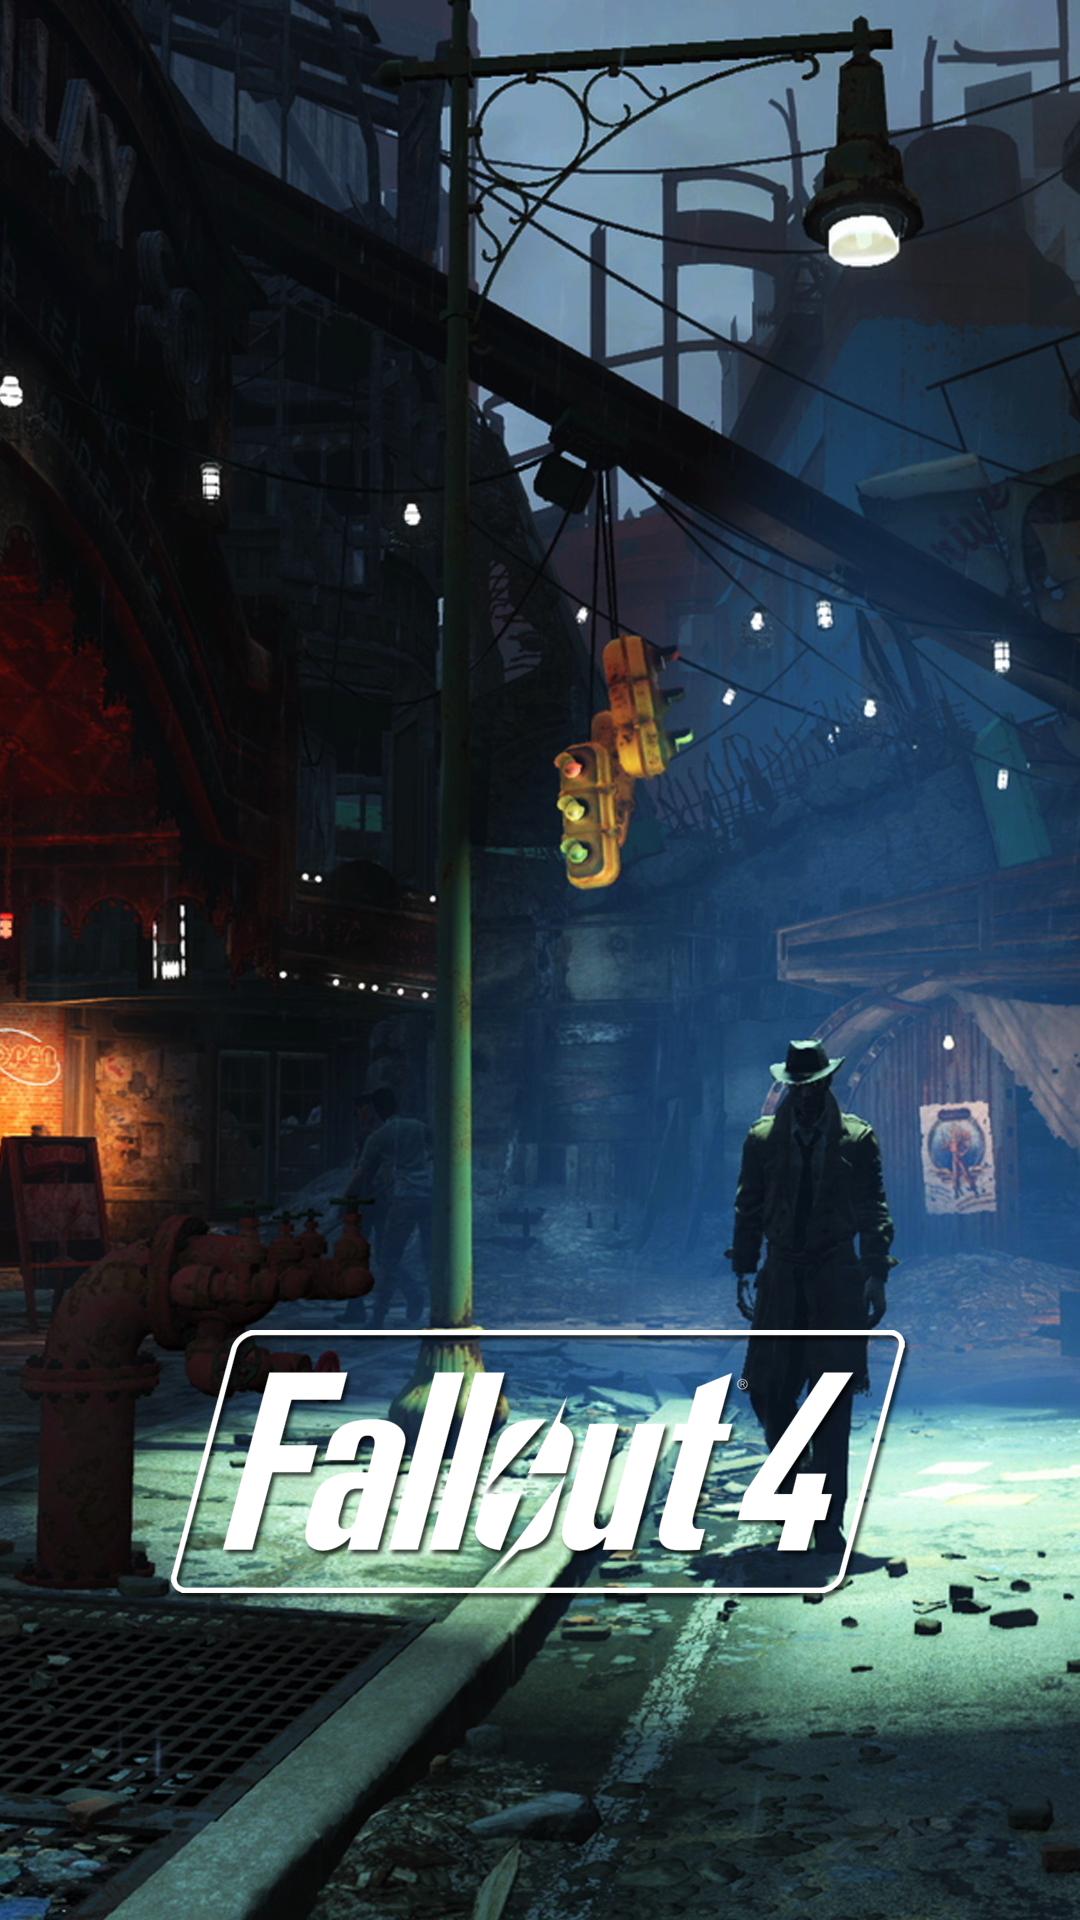 Free download Fallout 4 nieuws Prachtige iPhone en Android wallpaper voor Fallout [1080x1920] for your Desktop, Mobile & Tablet. Explore Fallout iPhone 6 Wallpaper. Fallout 4 Windows 10 Wallpaper, Fallout 4 Wallpaper 1920x Fallout 4